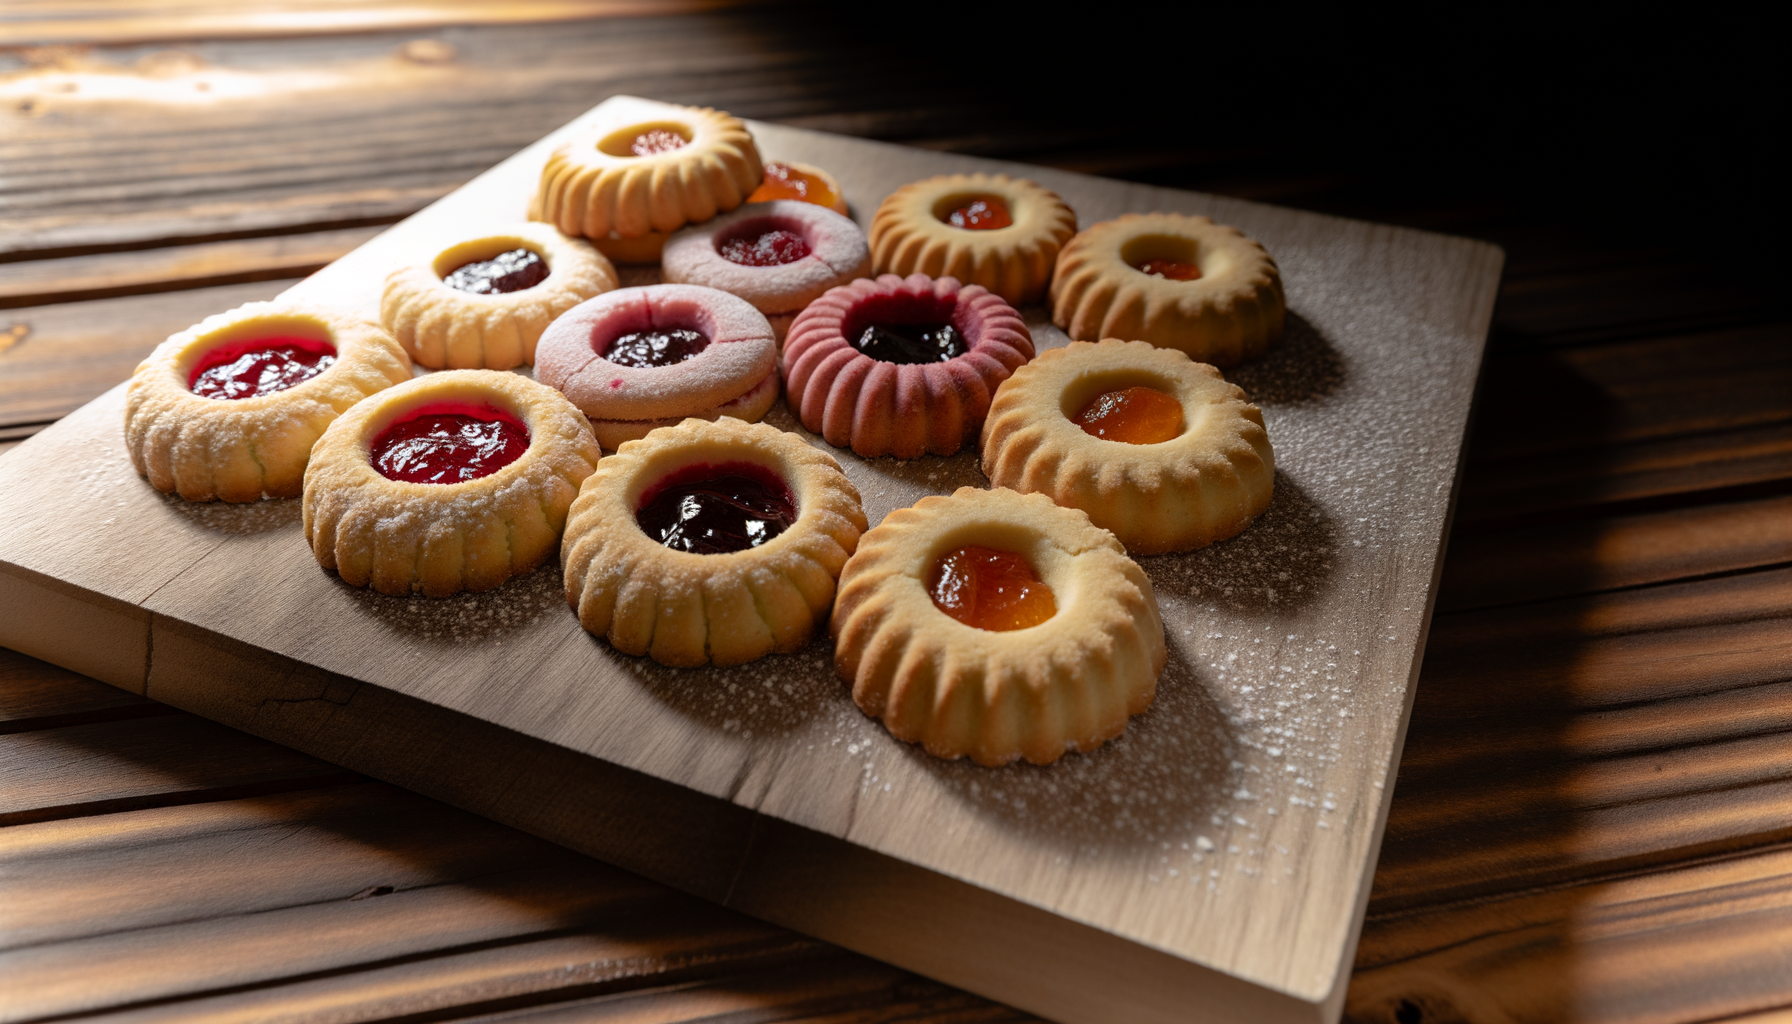 Vibrant thumbprint cookies with jam fillings, presented on a wooden board, offering a rustic and appealing homemade dessert experience.